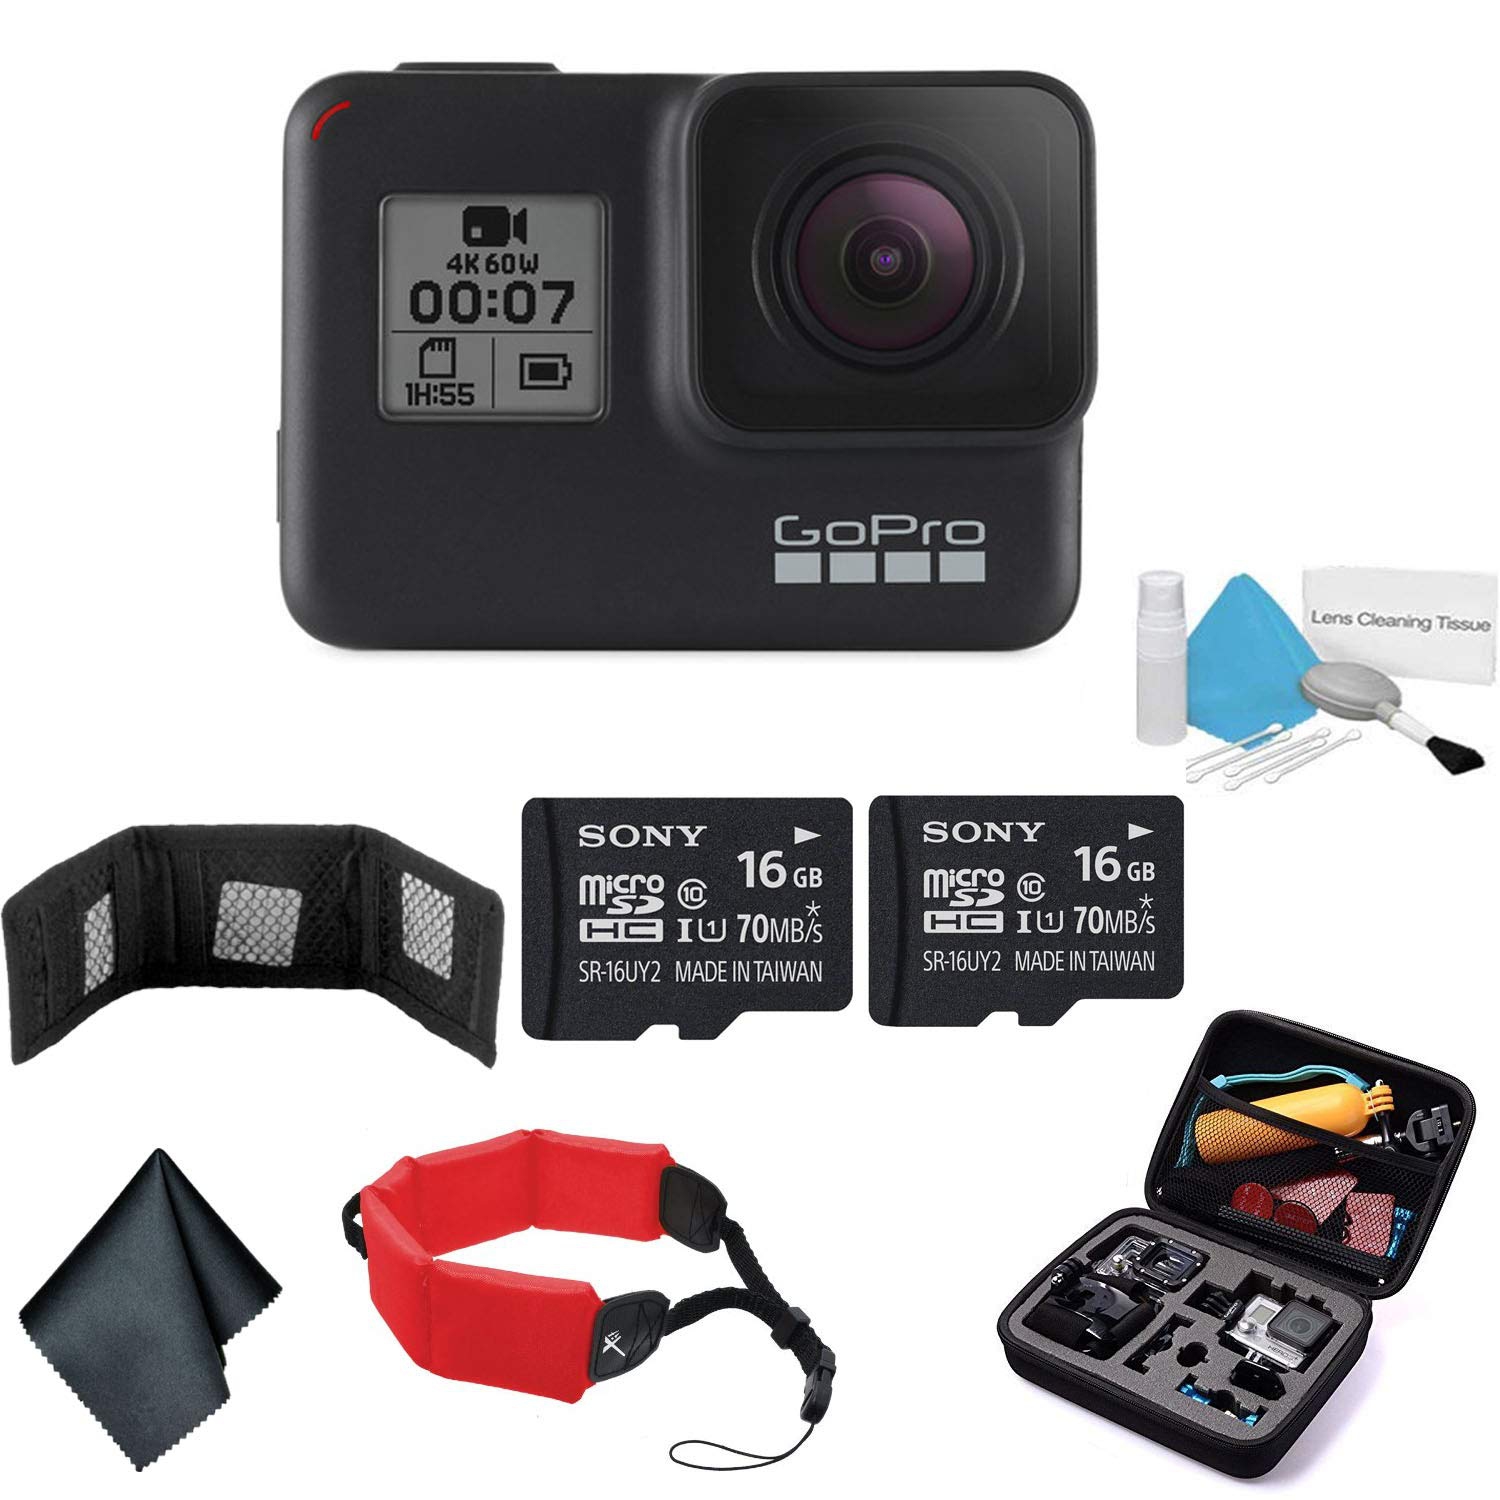 GoPro HERO7 (Black) Waterproof Digital Action Camera 4K HD Video 12MP Live Streaming - Bundle with 2X 16GB Memory Cards + Floating Strap + More